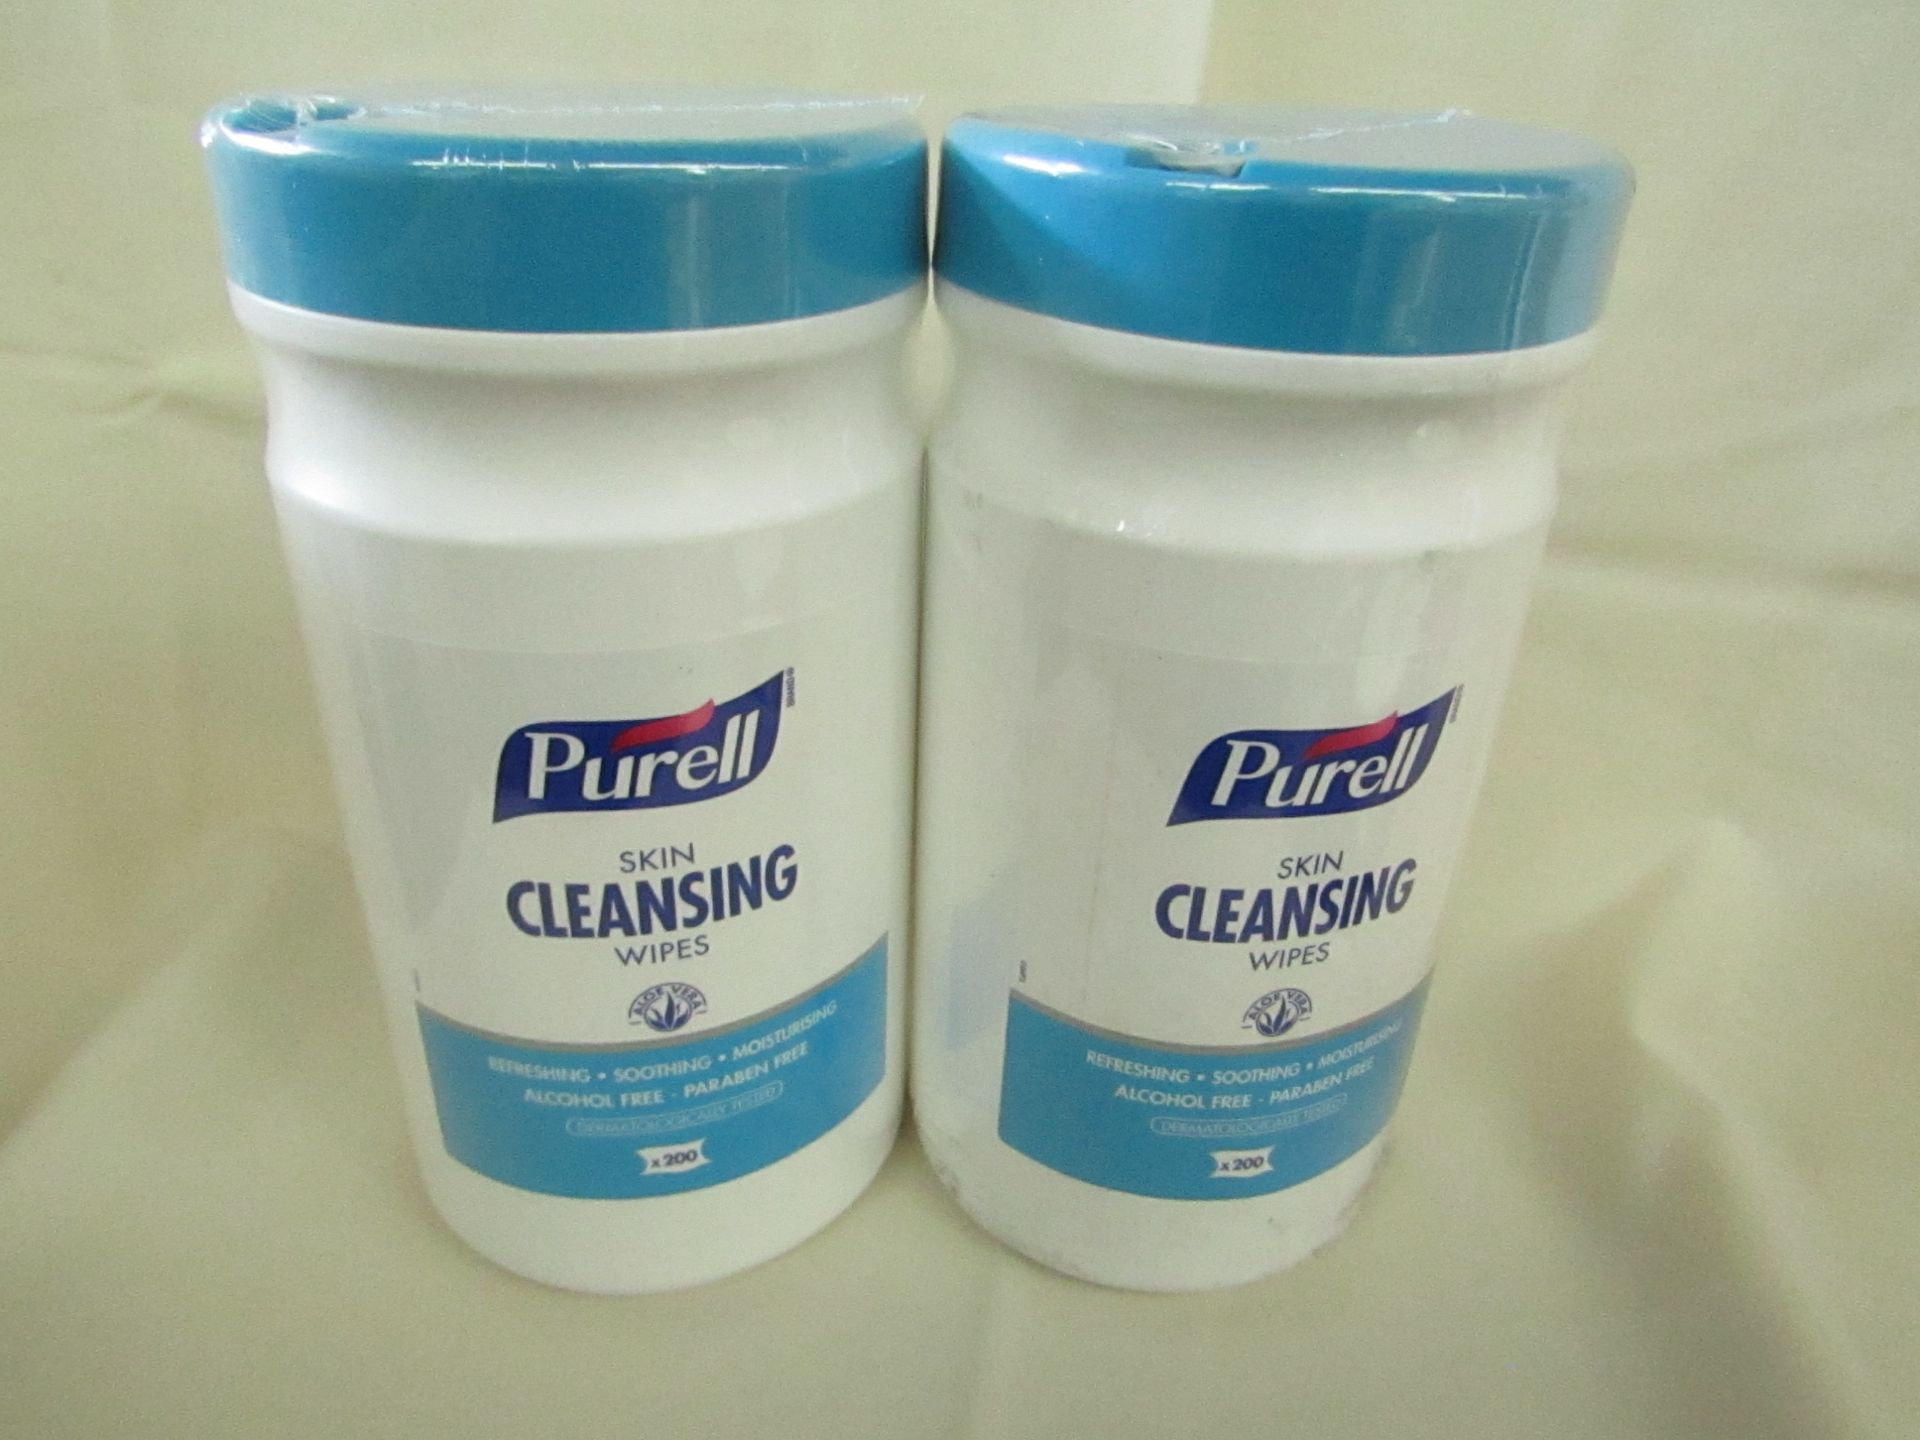 2x Purell - Skin Cleansing Wipes ( 200 Wipes ) - New & Packaged.